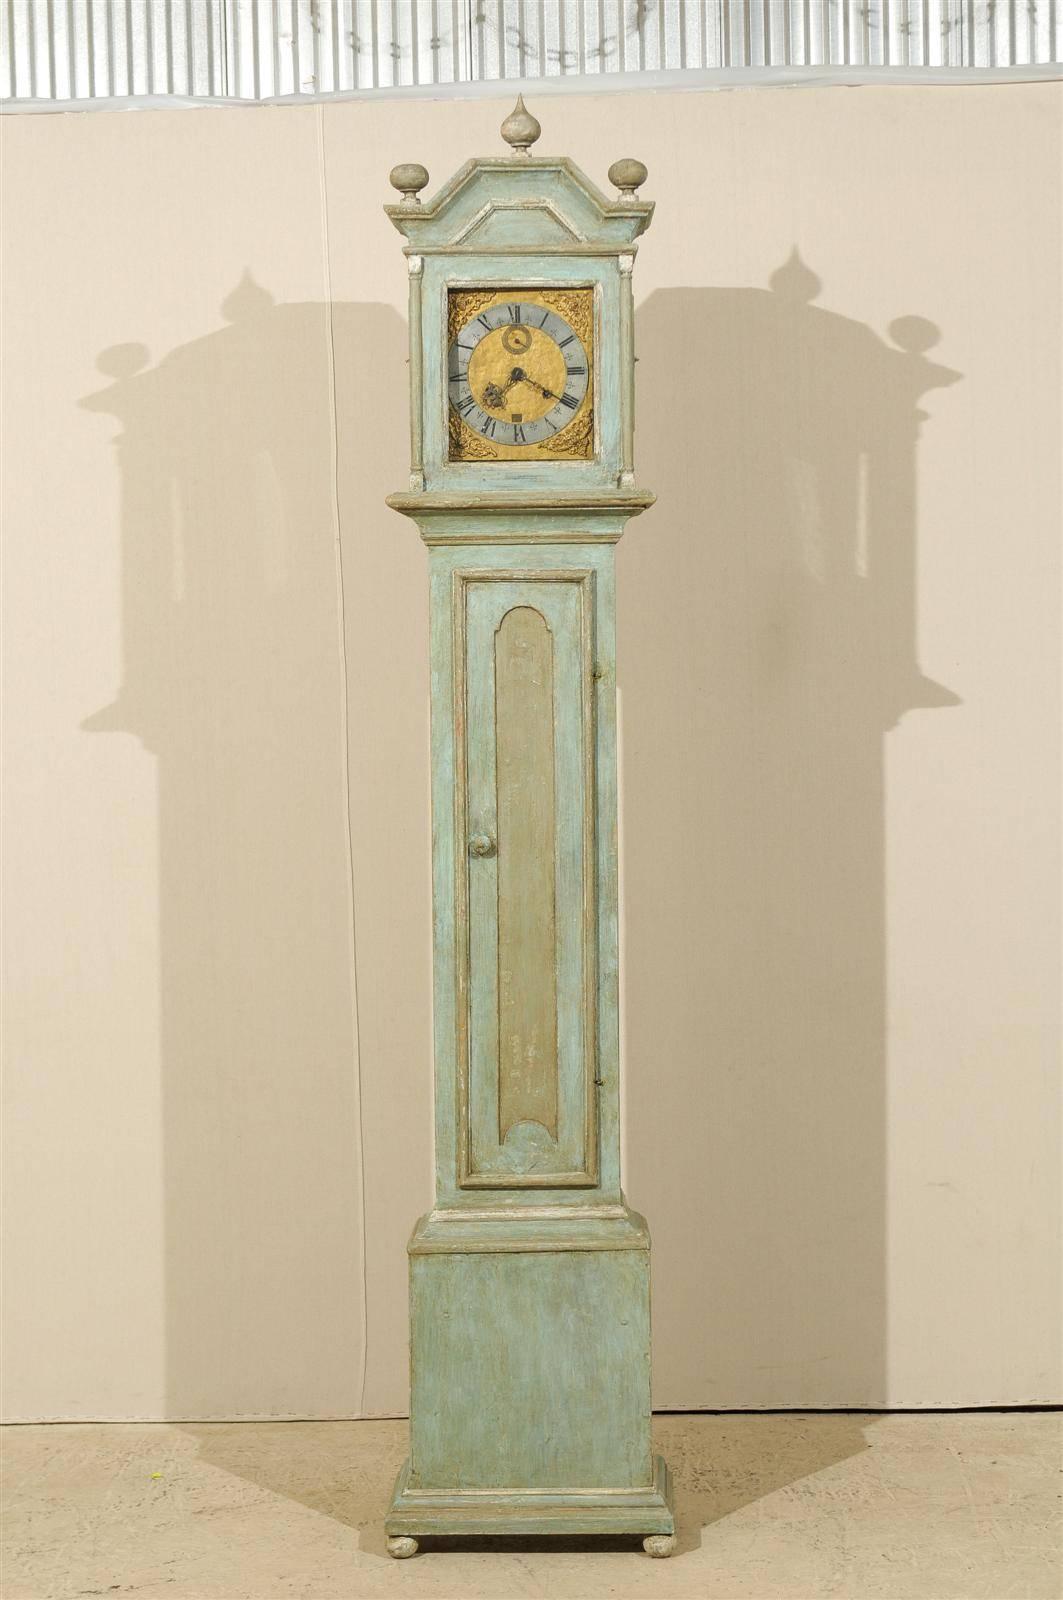 A 19th century Swedish clock. This 19th century Swedish painted wood clock features a linear profile. Its rectangular shaped head surrounds the pewter ring face with Roman numbers over a gilded background. The bonnet is topped with a tear-drop motif